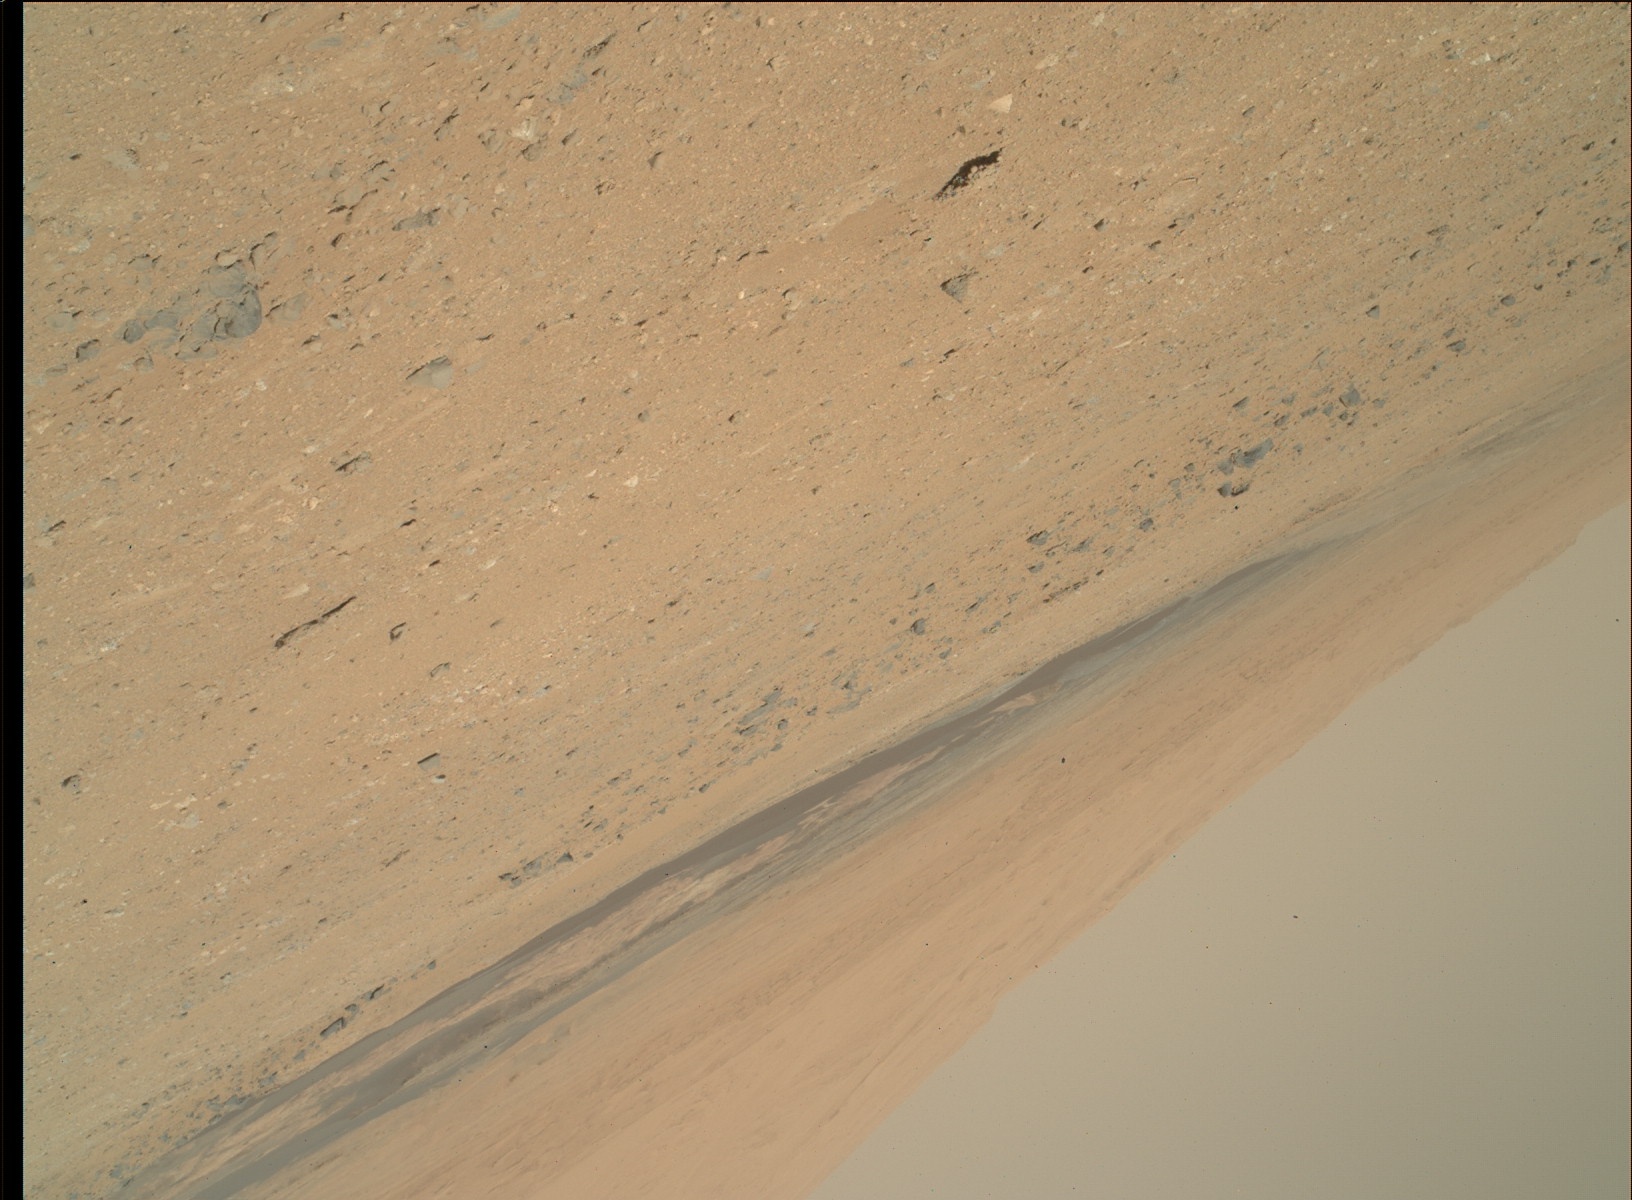 Nasa's Mars rover Curiosity acquired this image using its Mars Hand Lens Imager (MAHLI) on Sol 410